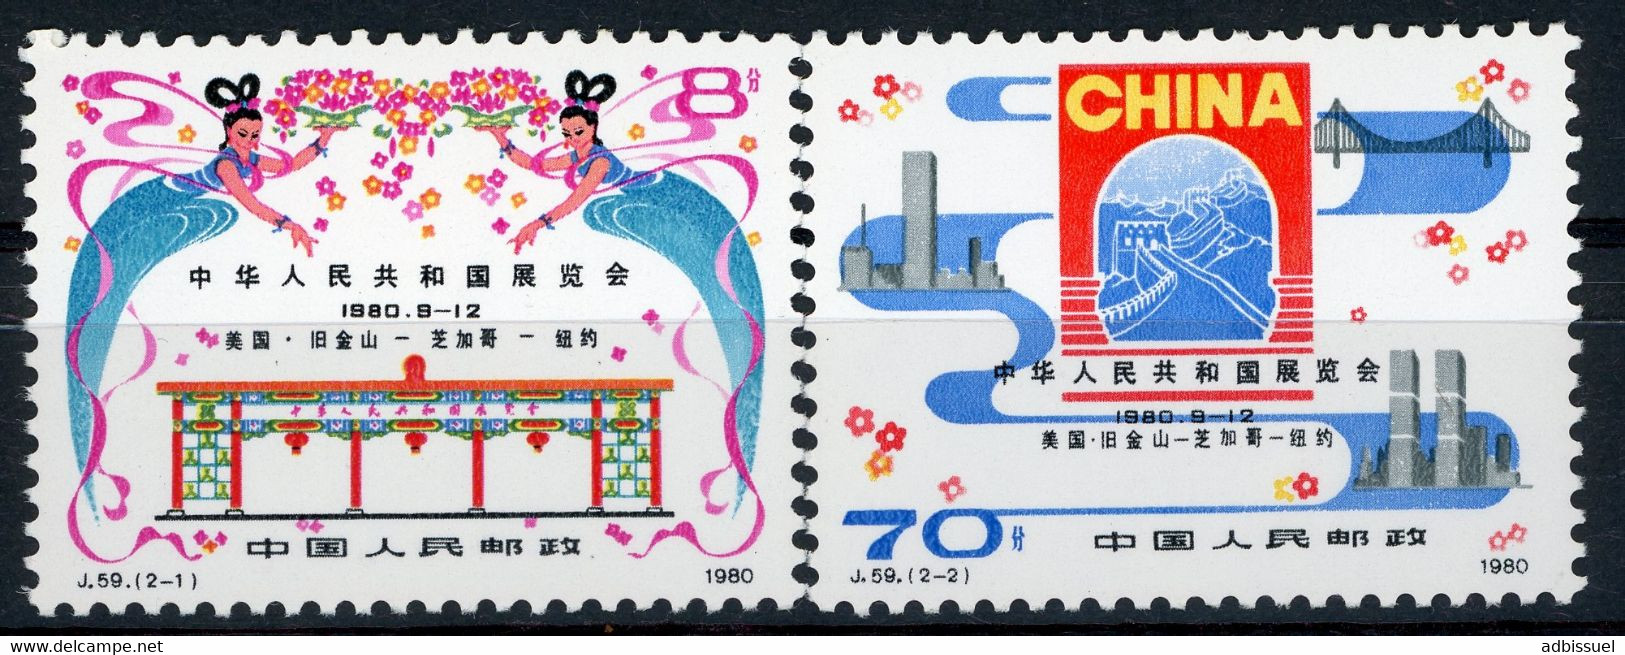 CHINA CHINE 1980 N° 2366 + 2367. Value (cote) 23 € MNH. VG/TB. Chinese Trade Show (Exposition Commerciale Chinoise) - Ongebruikt